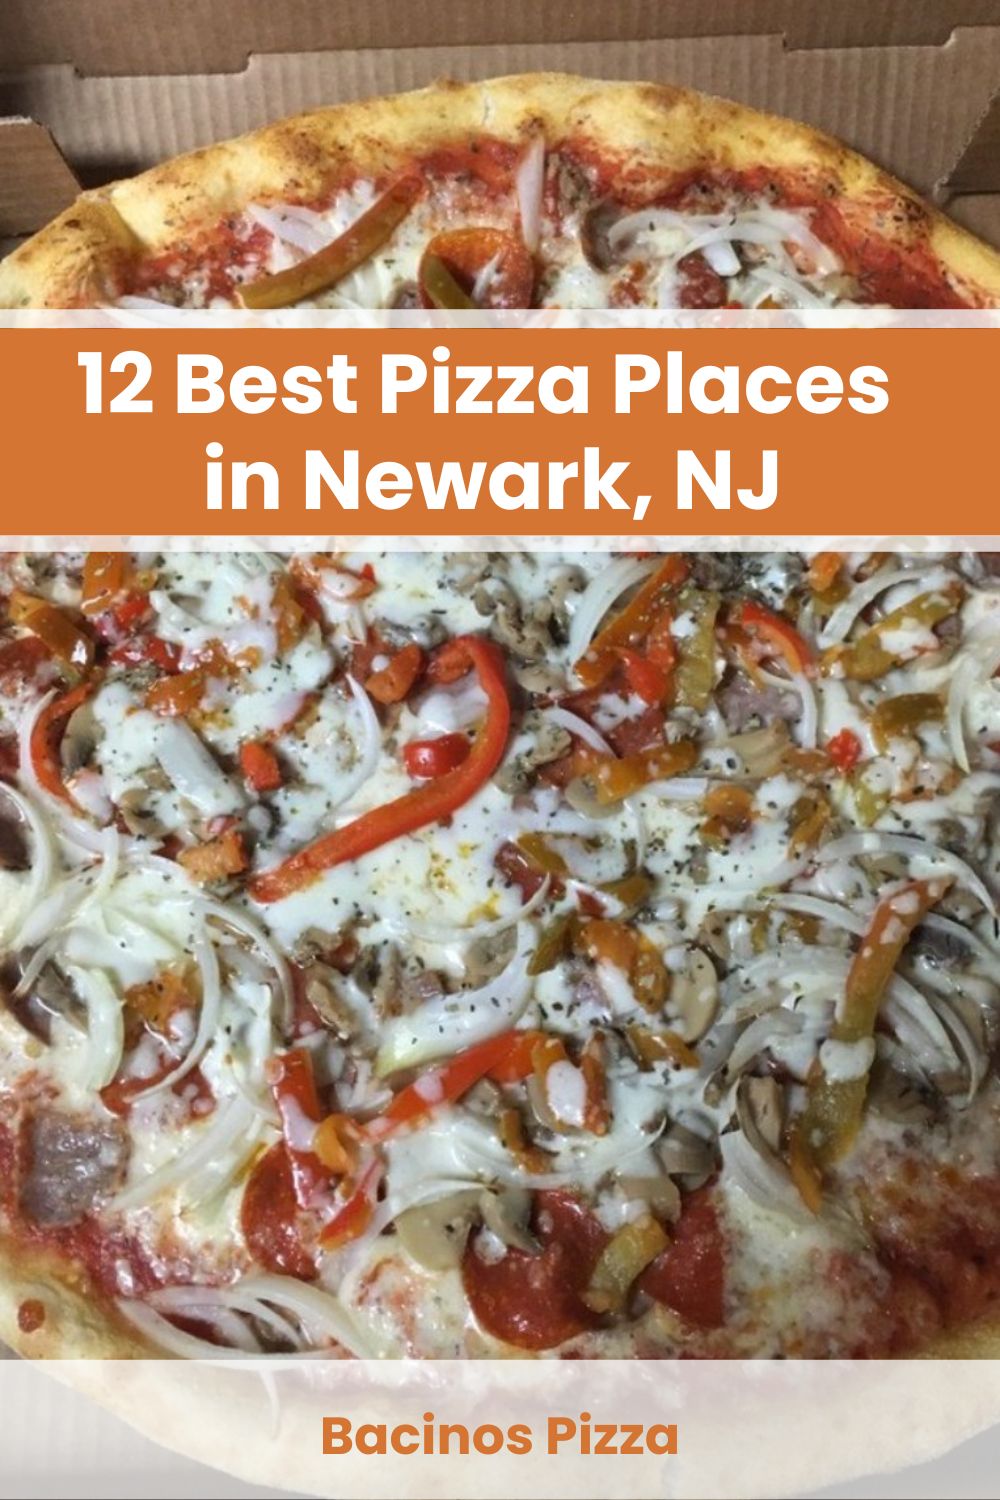 Best Pizza Place in Newark